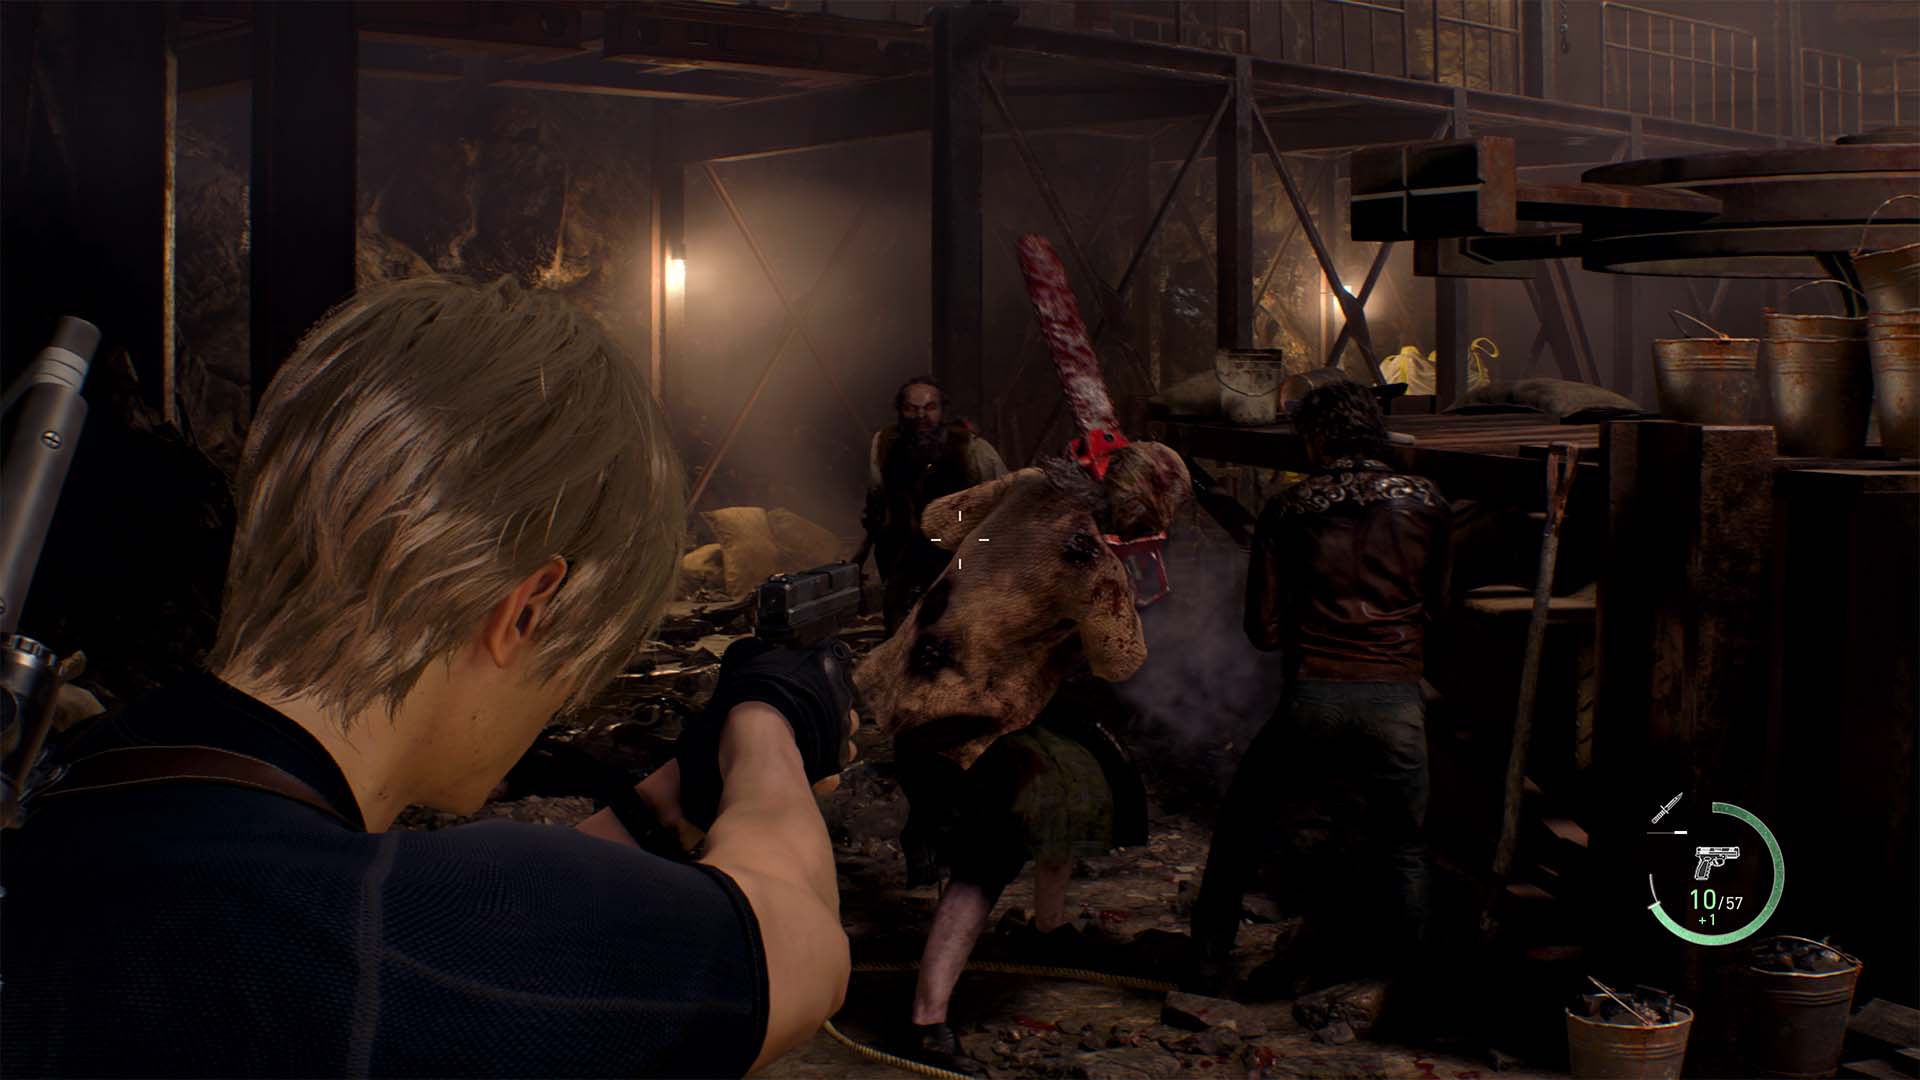 Resident Evil 4, The Last of Us Part I, WWE 2K23, and More: New